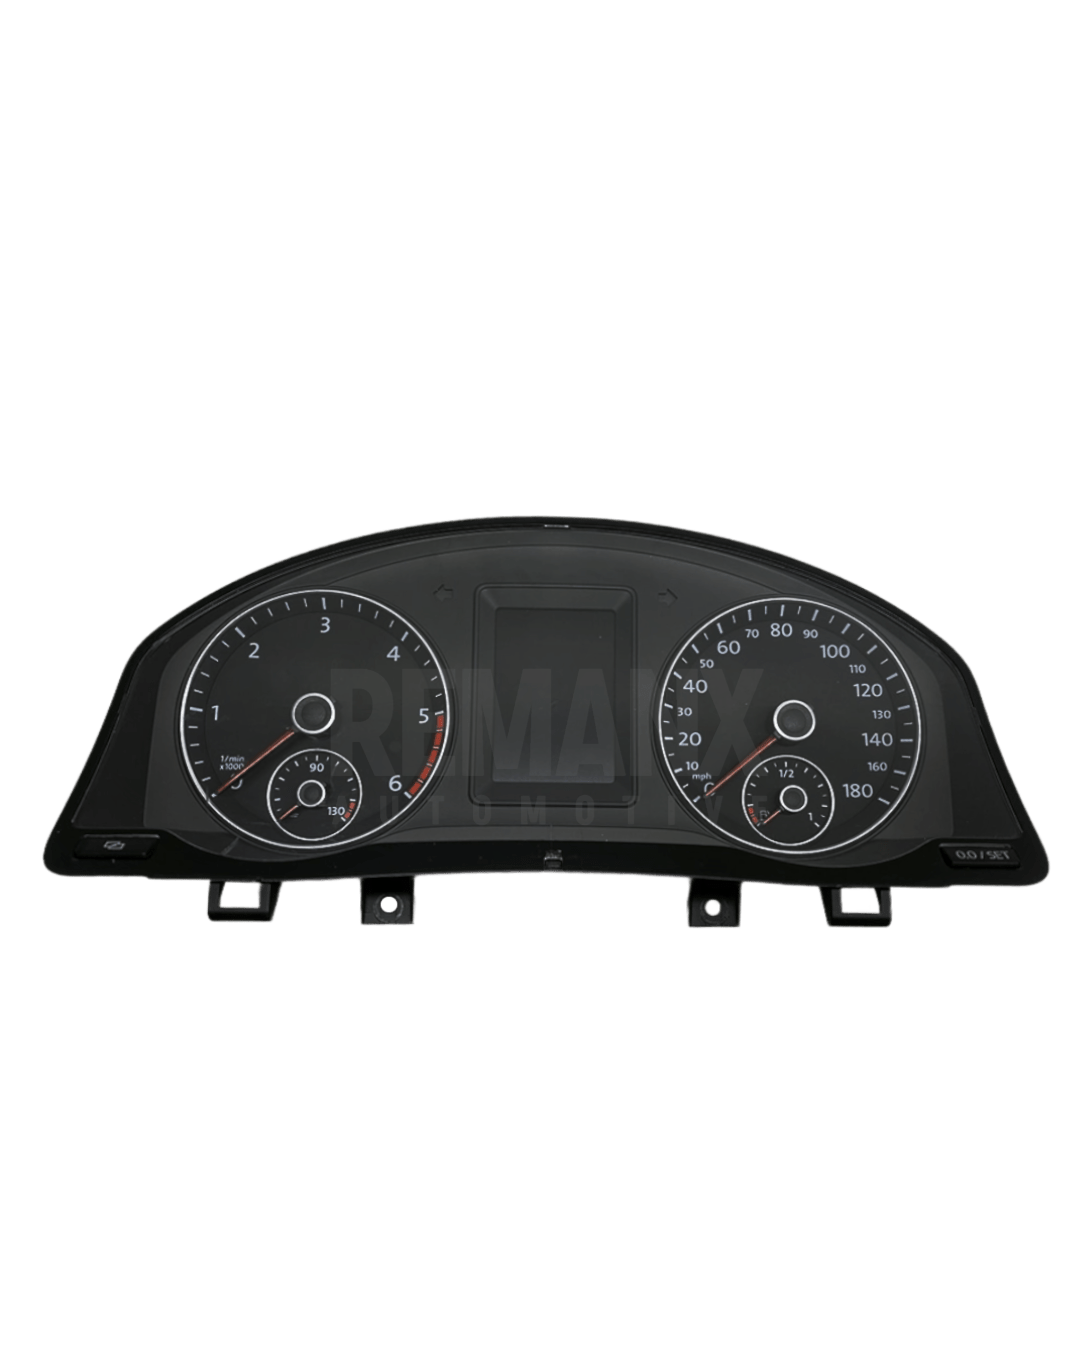 VW Eos Instrument cluster from Remanx